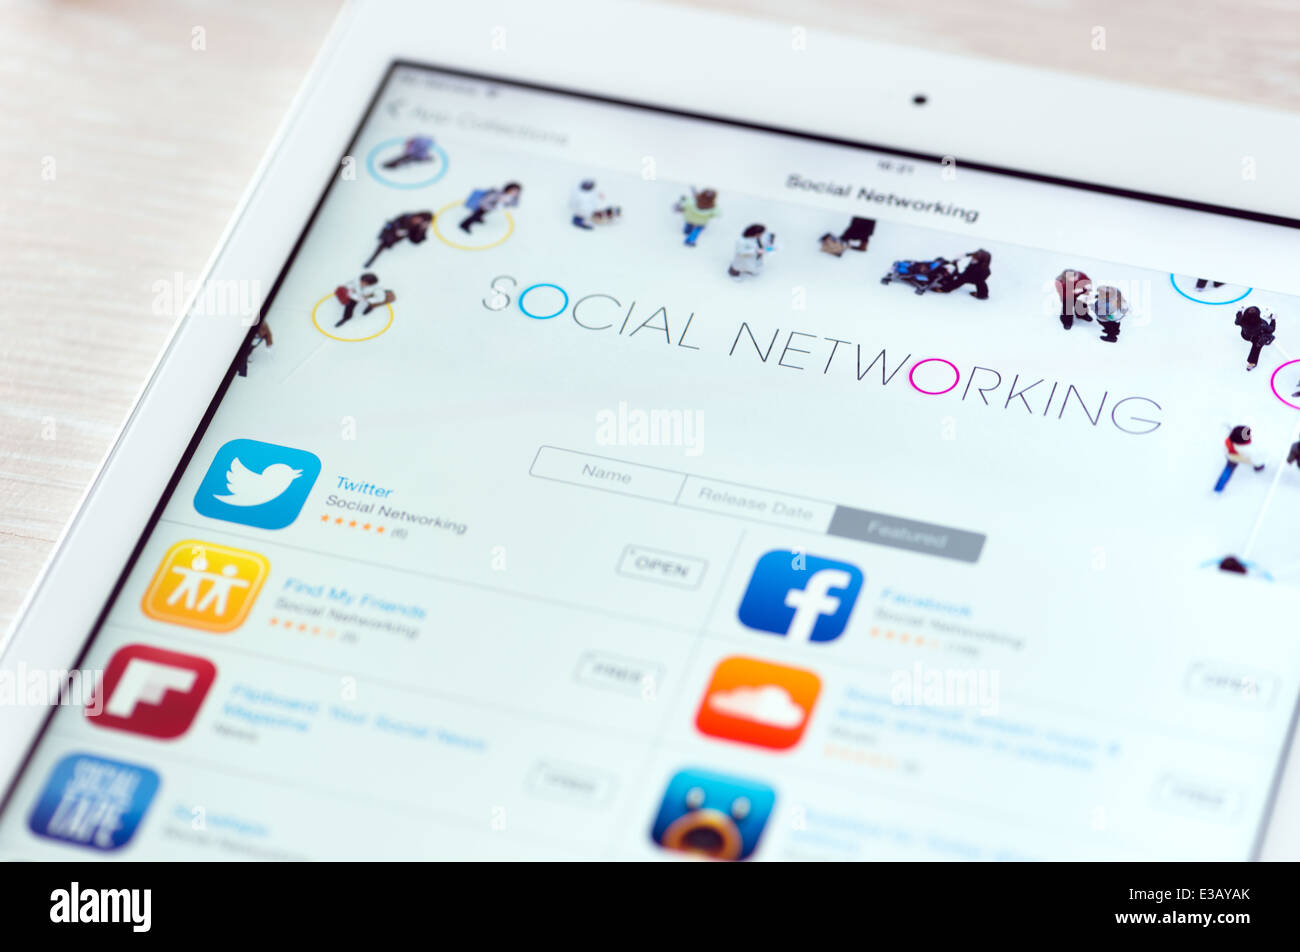 Brand new modern white Apple iPad Air with featured social networking apps in App Store collection Stock Photo